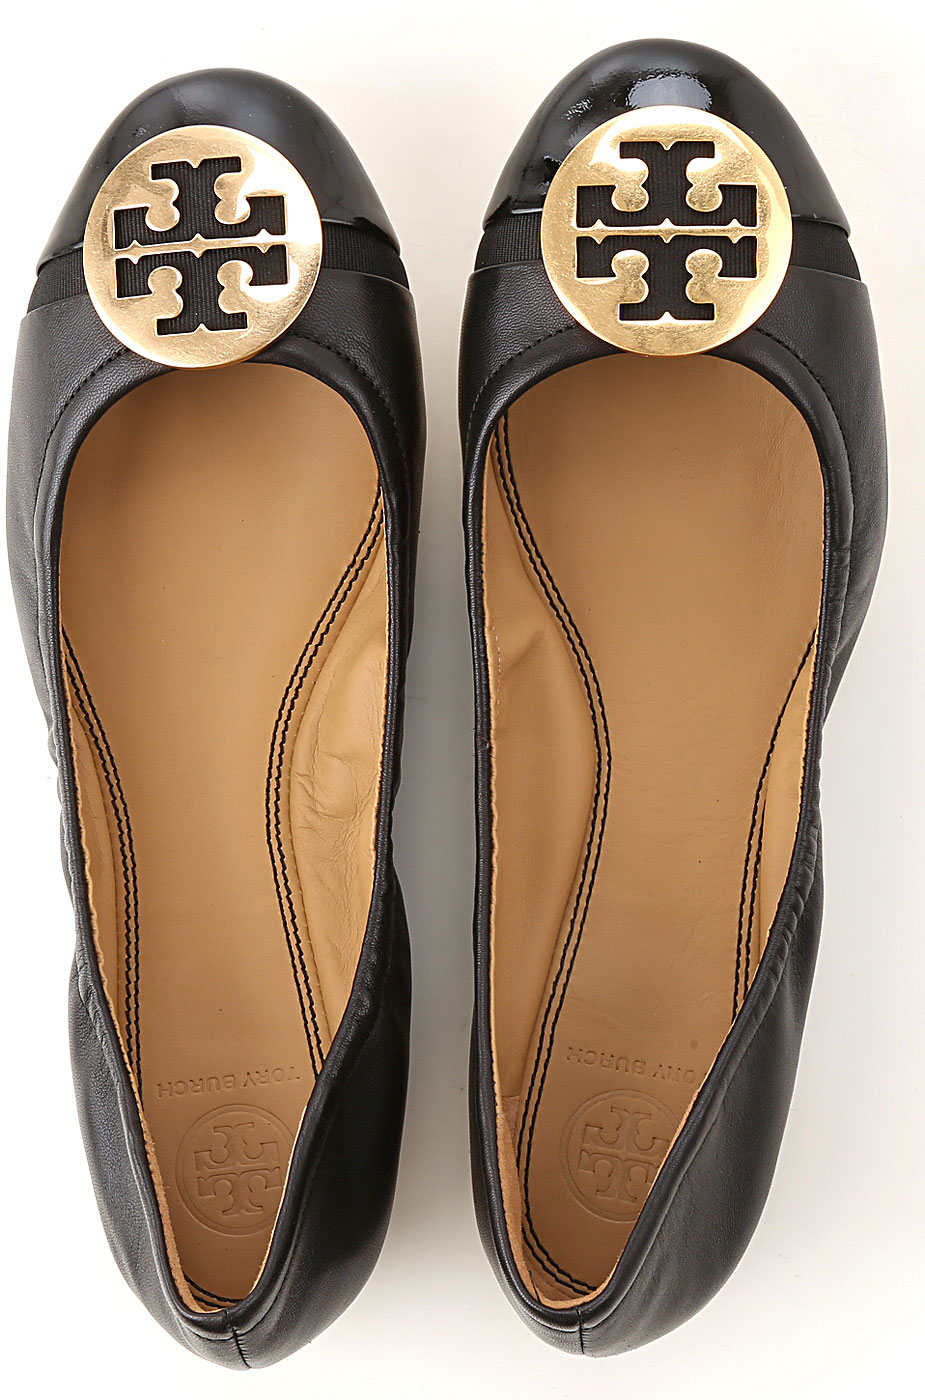 Womens Shoes Tory Burch, Style code: 63176-004-